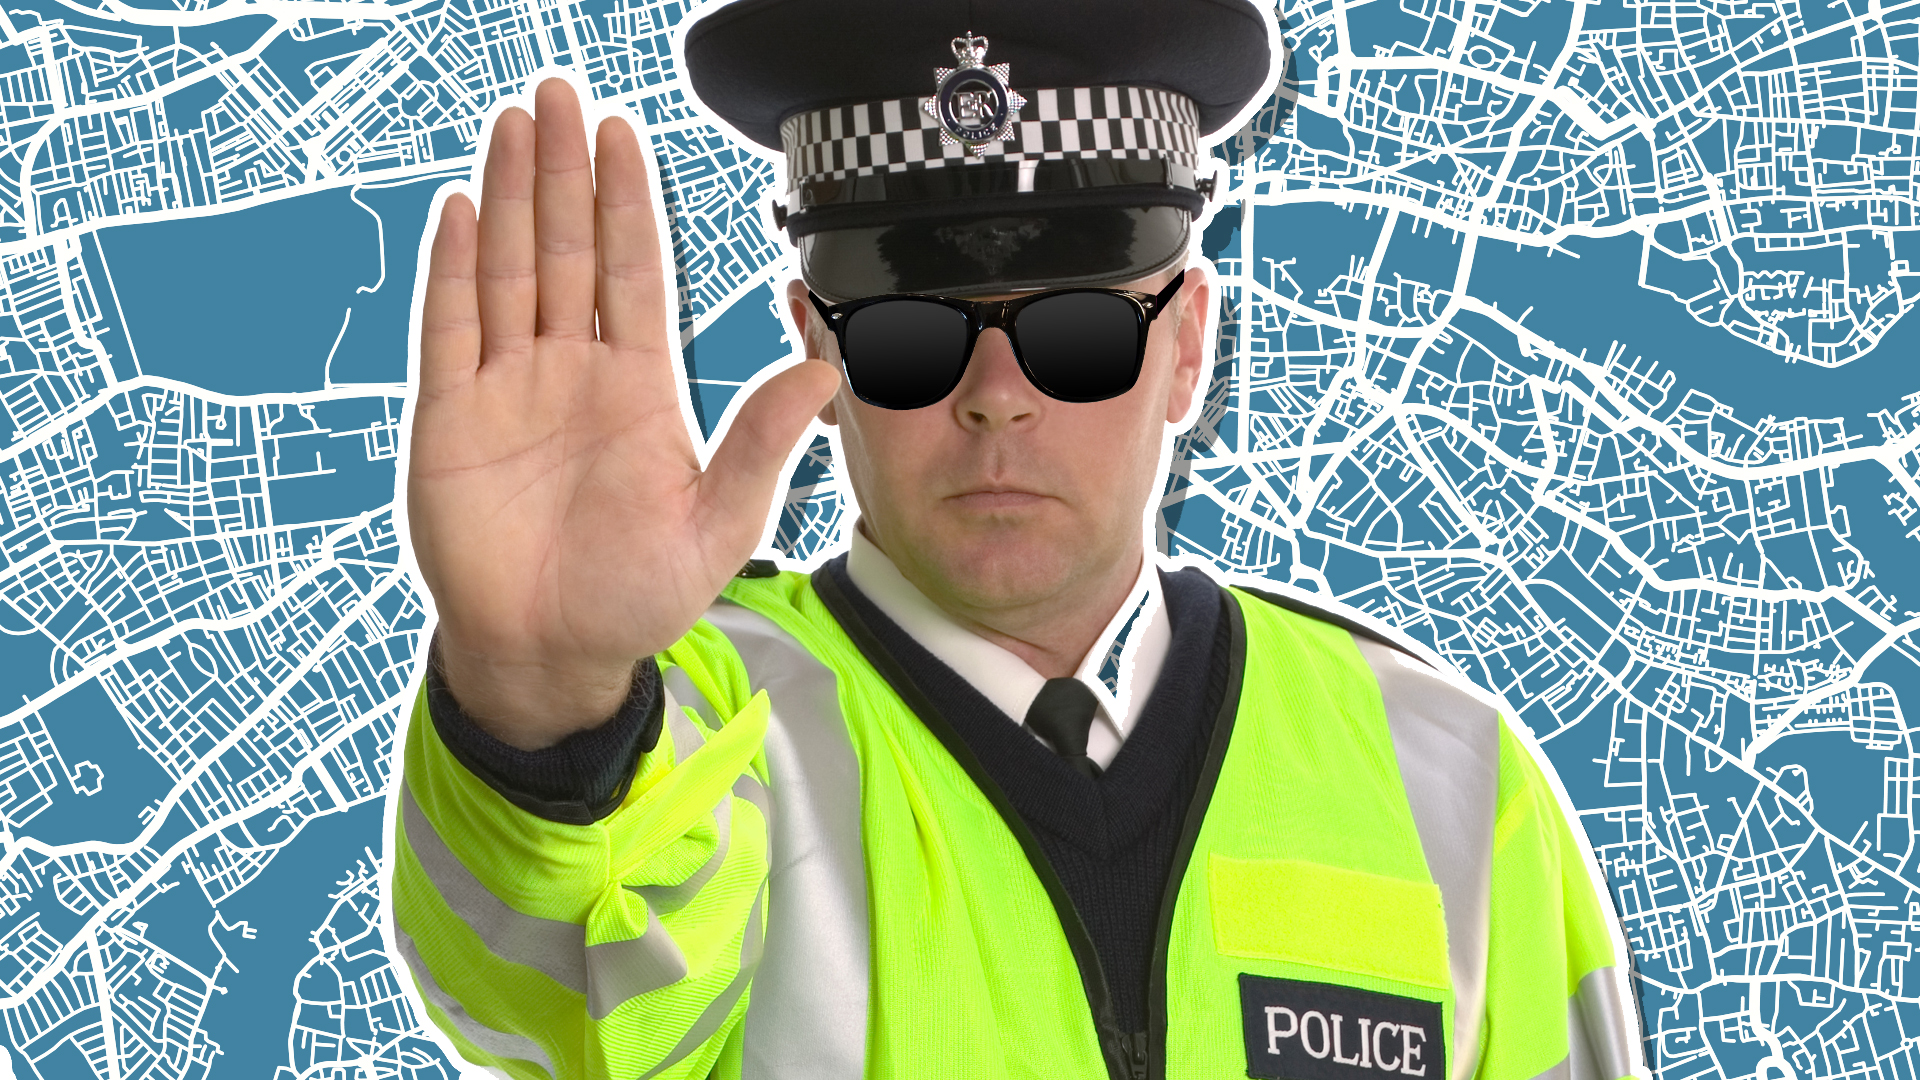 A police officer requesting you to stop